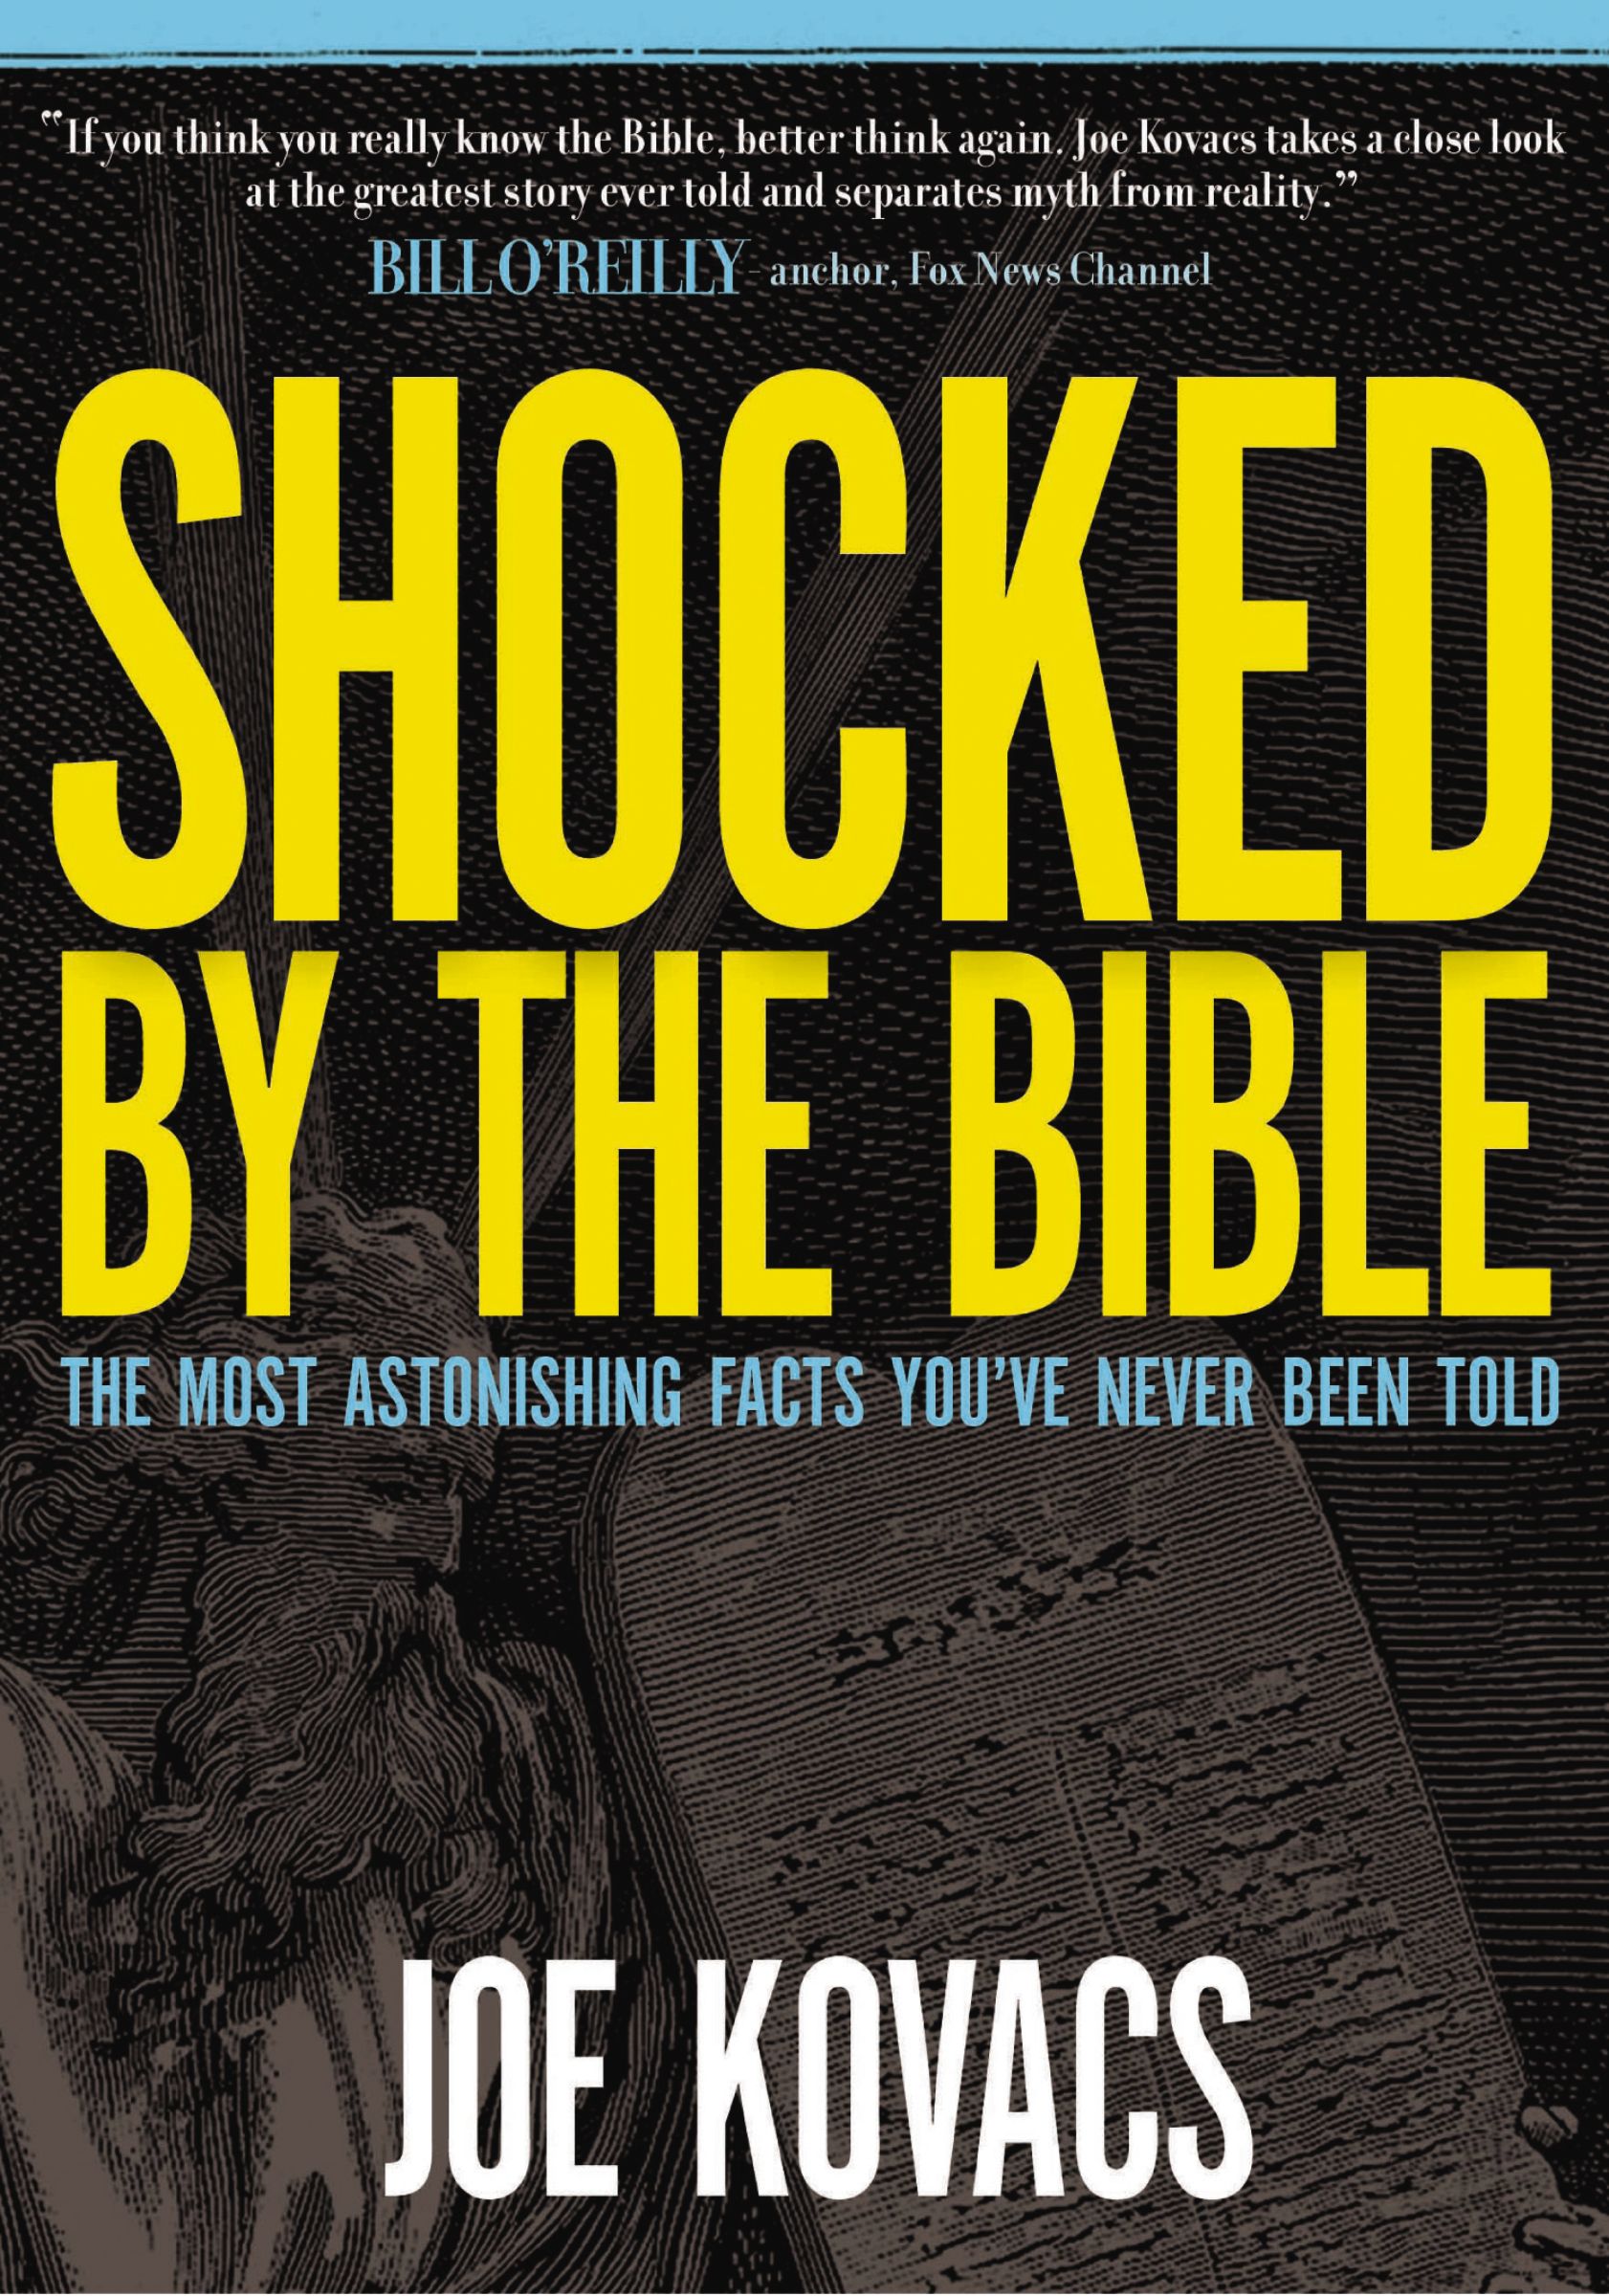 Shocked by the Bible - 10-14.99